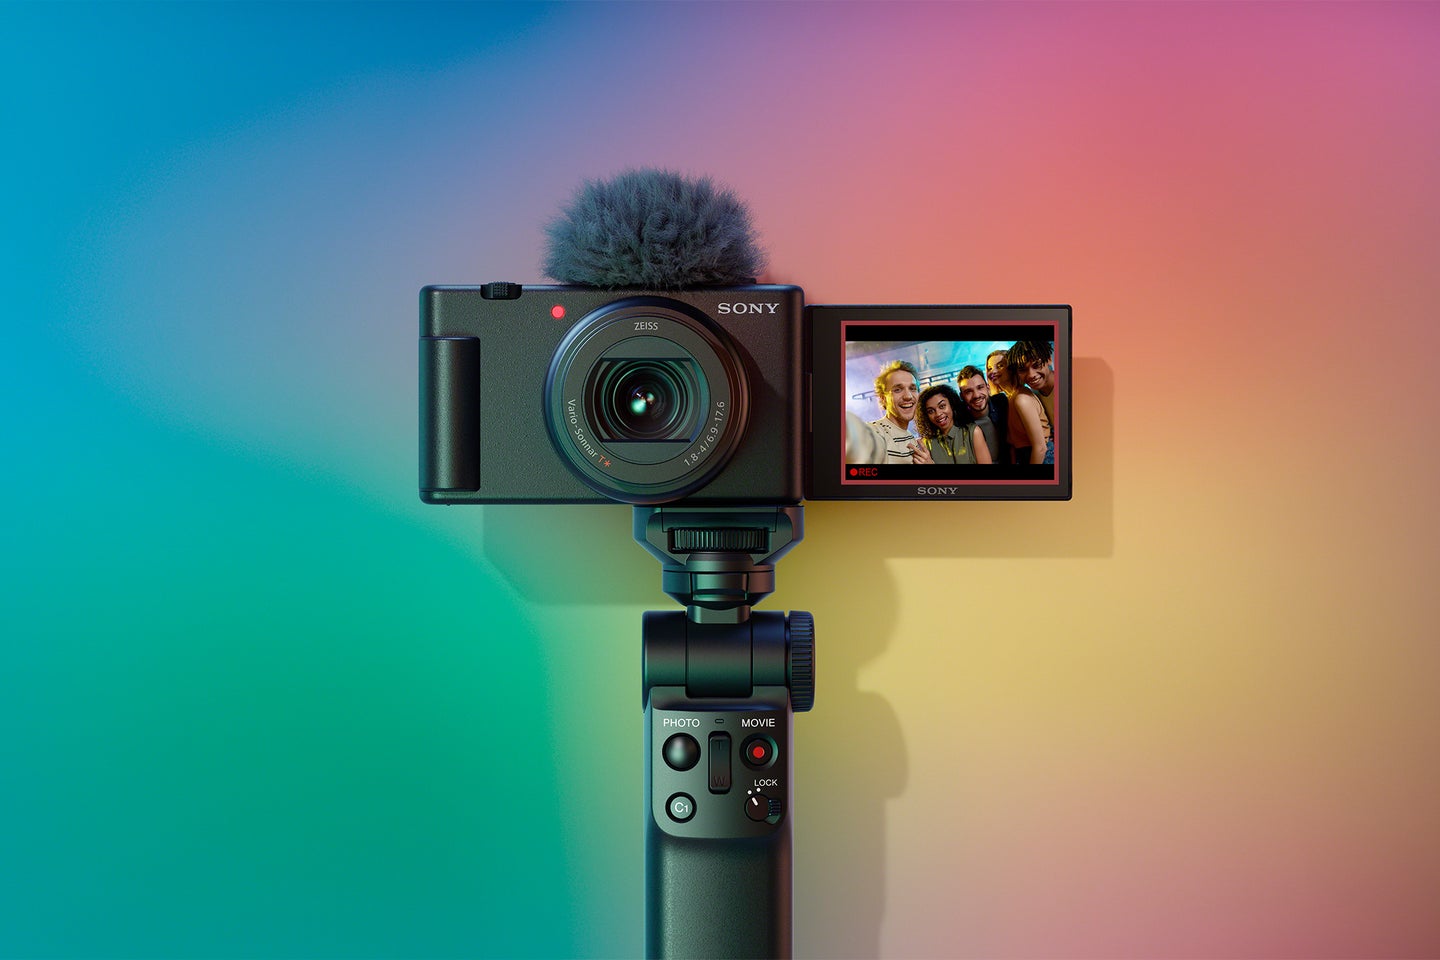 Sony ZV-1 II vlogging camera in front of a colorful background